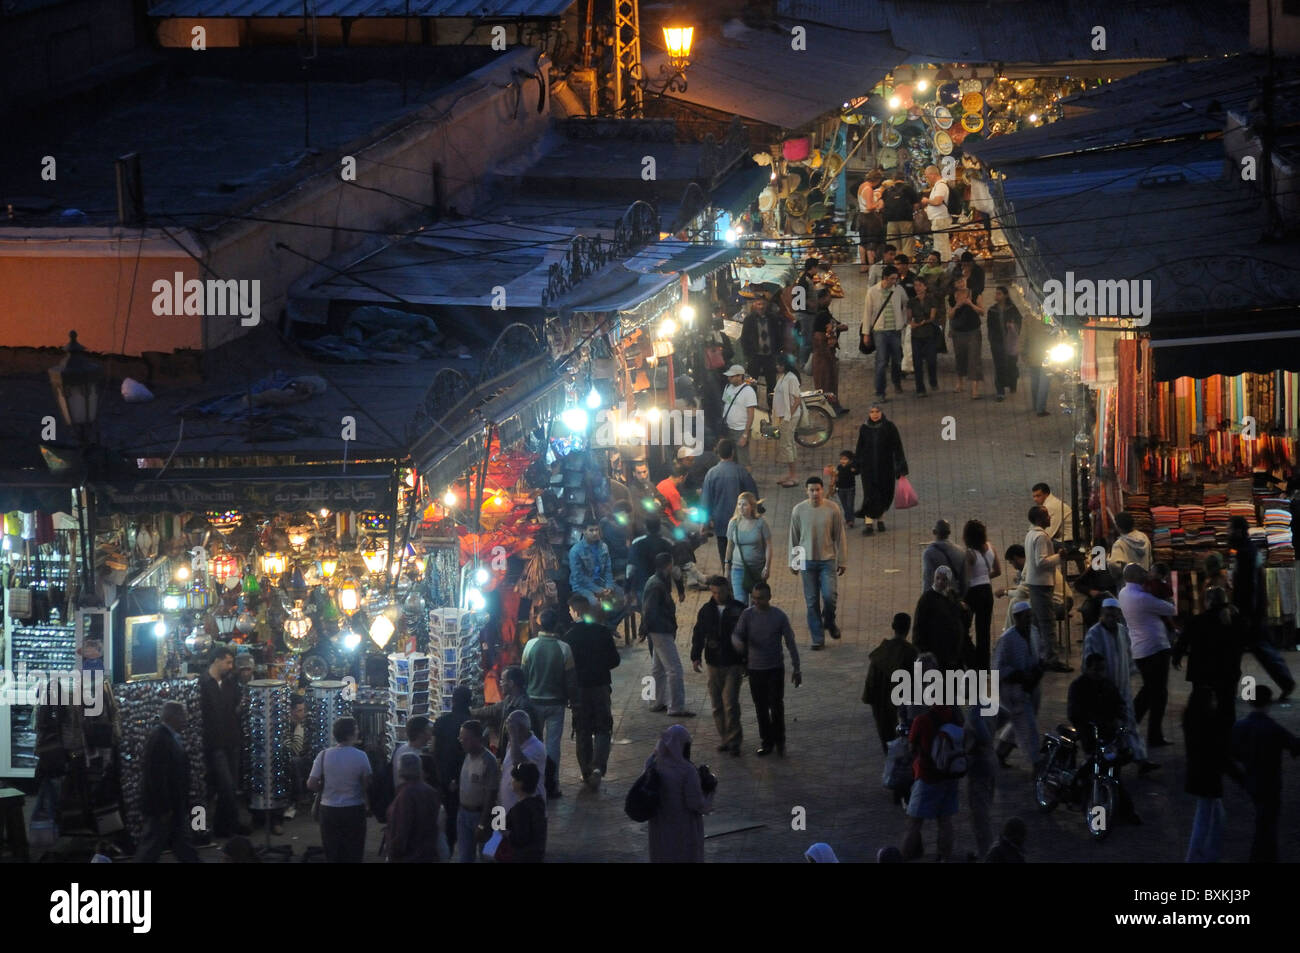 Crowds & general street scene at souk entrance, from Cafe de france at Djemaa el-Fna meeting place in Marrakech Stock Photo